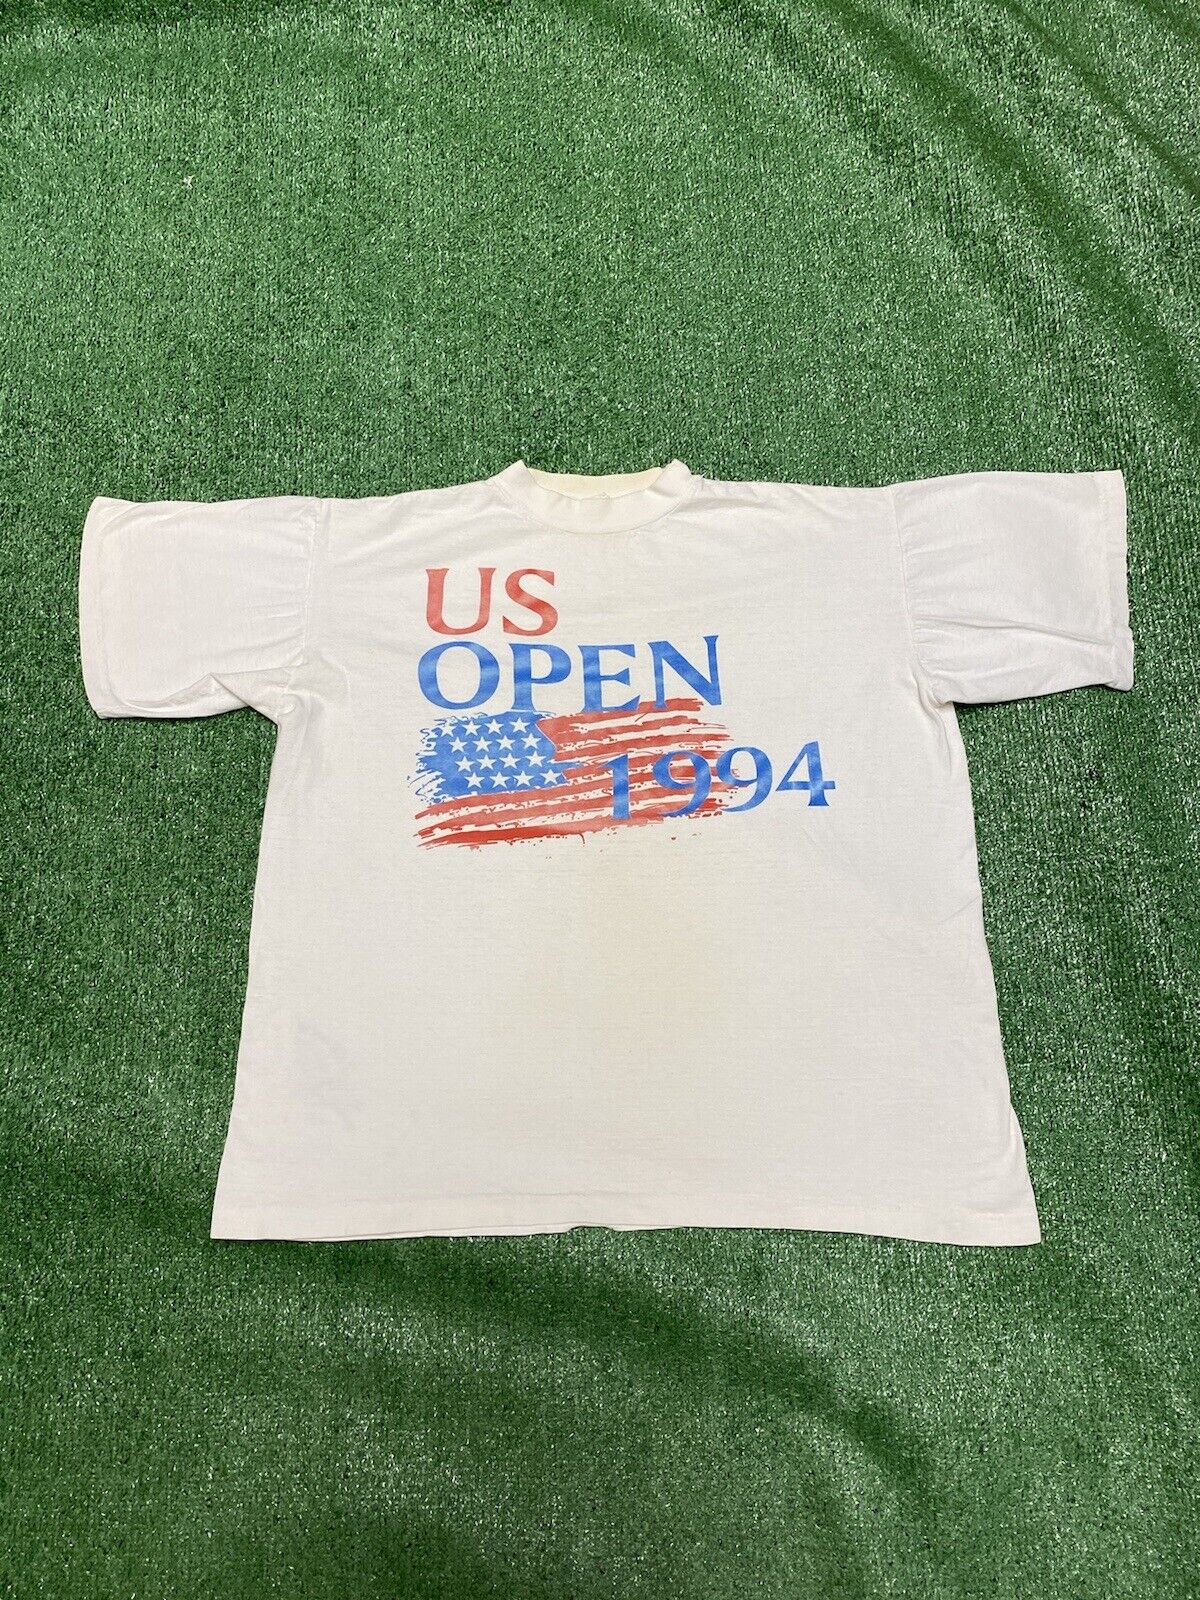 Vintage US Open Tennis White T-Shirt Men’s Size XL USA Flag Sports 1994 STAINED